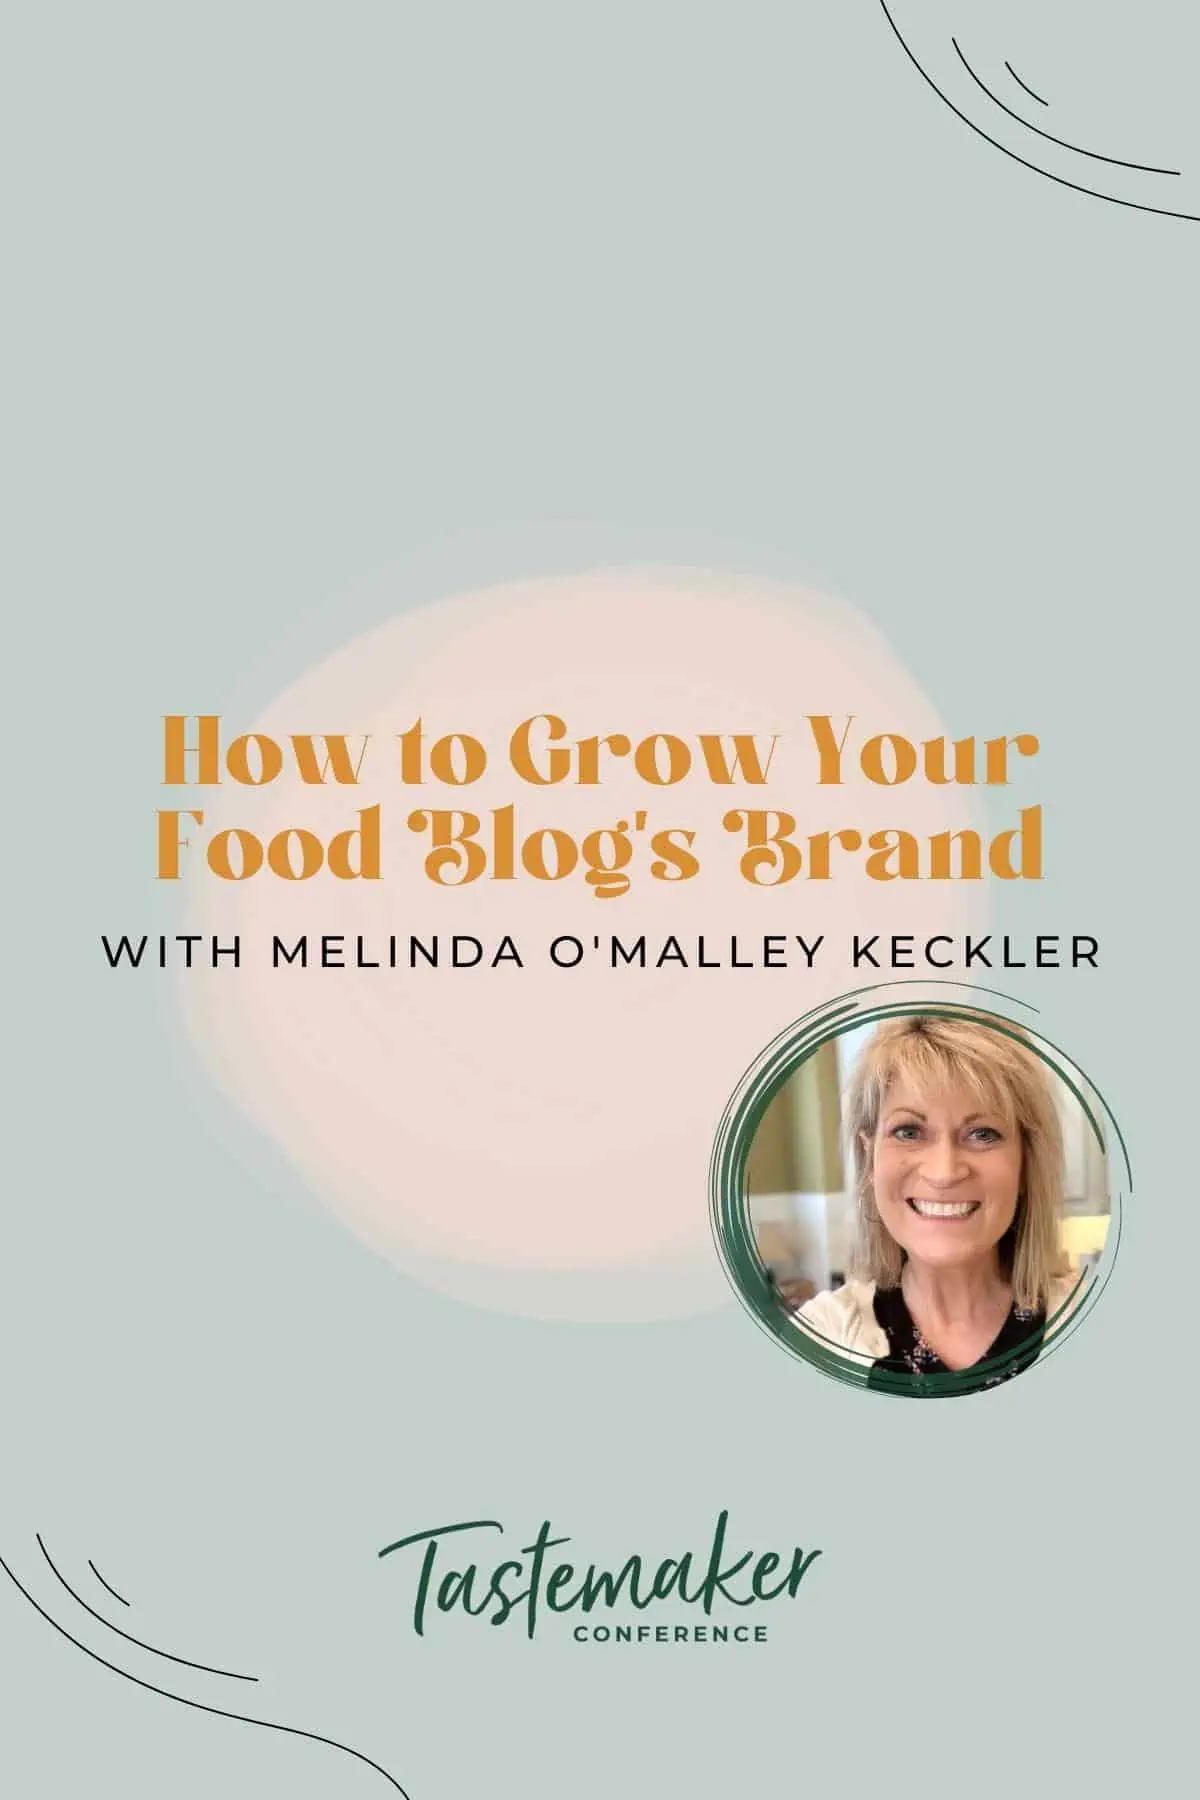 graphic reading how to grow your food blog's brand with melinda o'malley keckler with a headshot of a blonde woman smiling